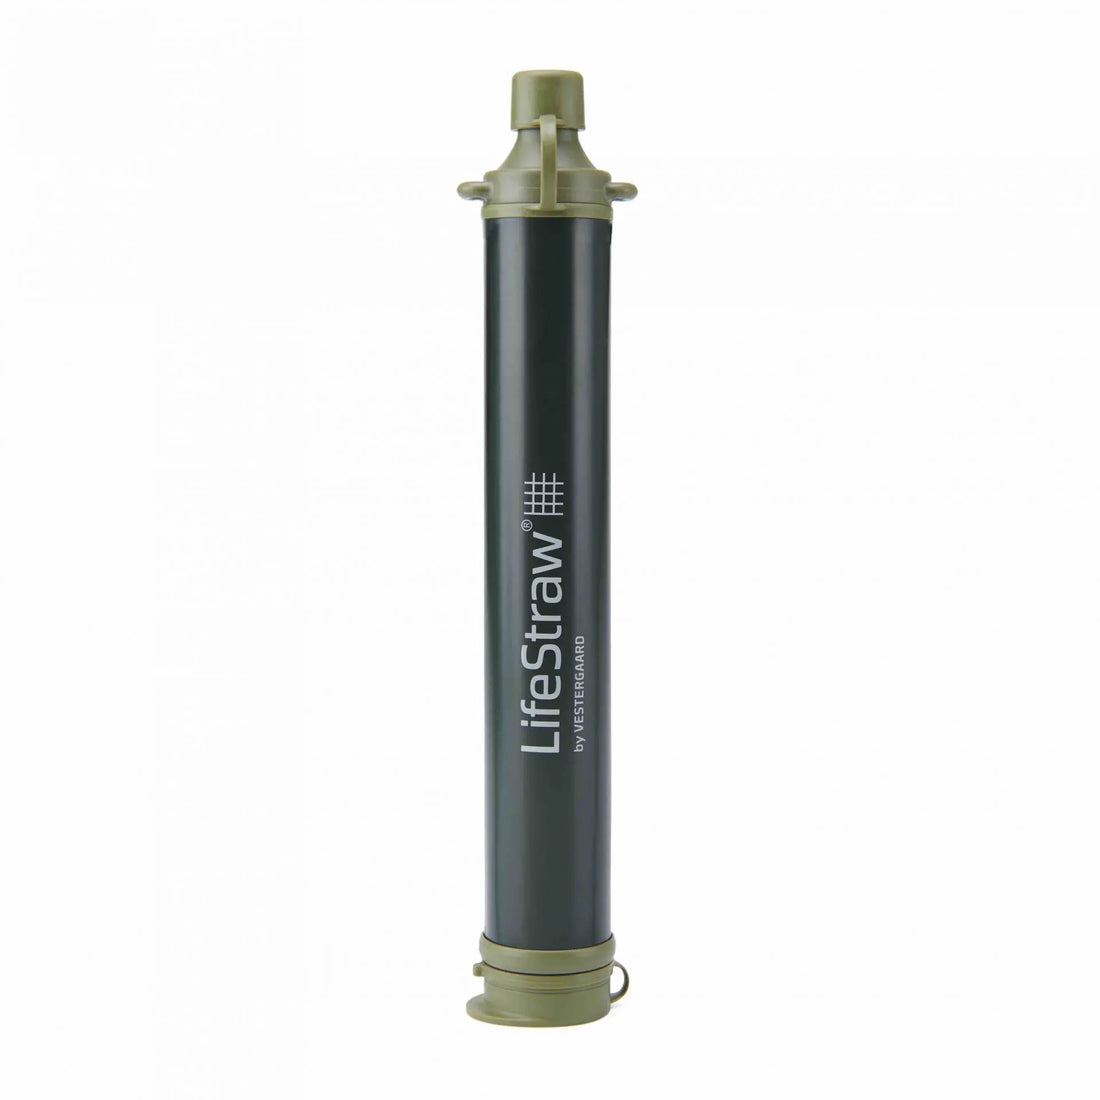 LifeStraw Personal, drinking filter to go